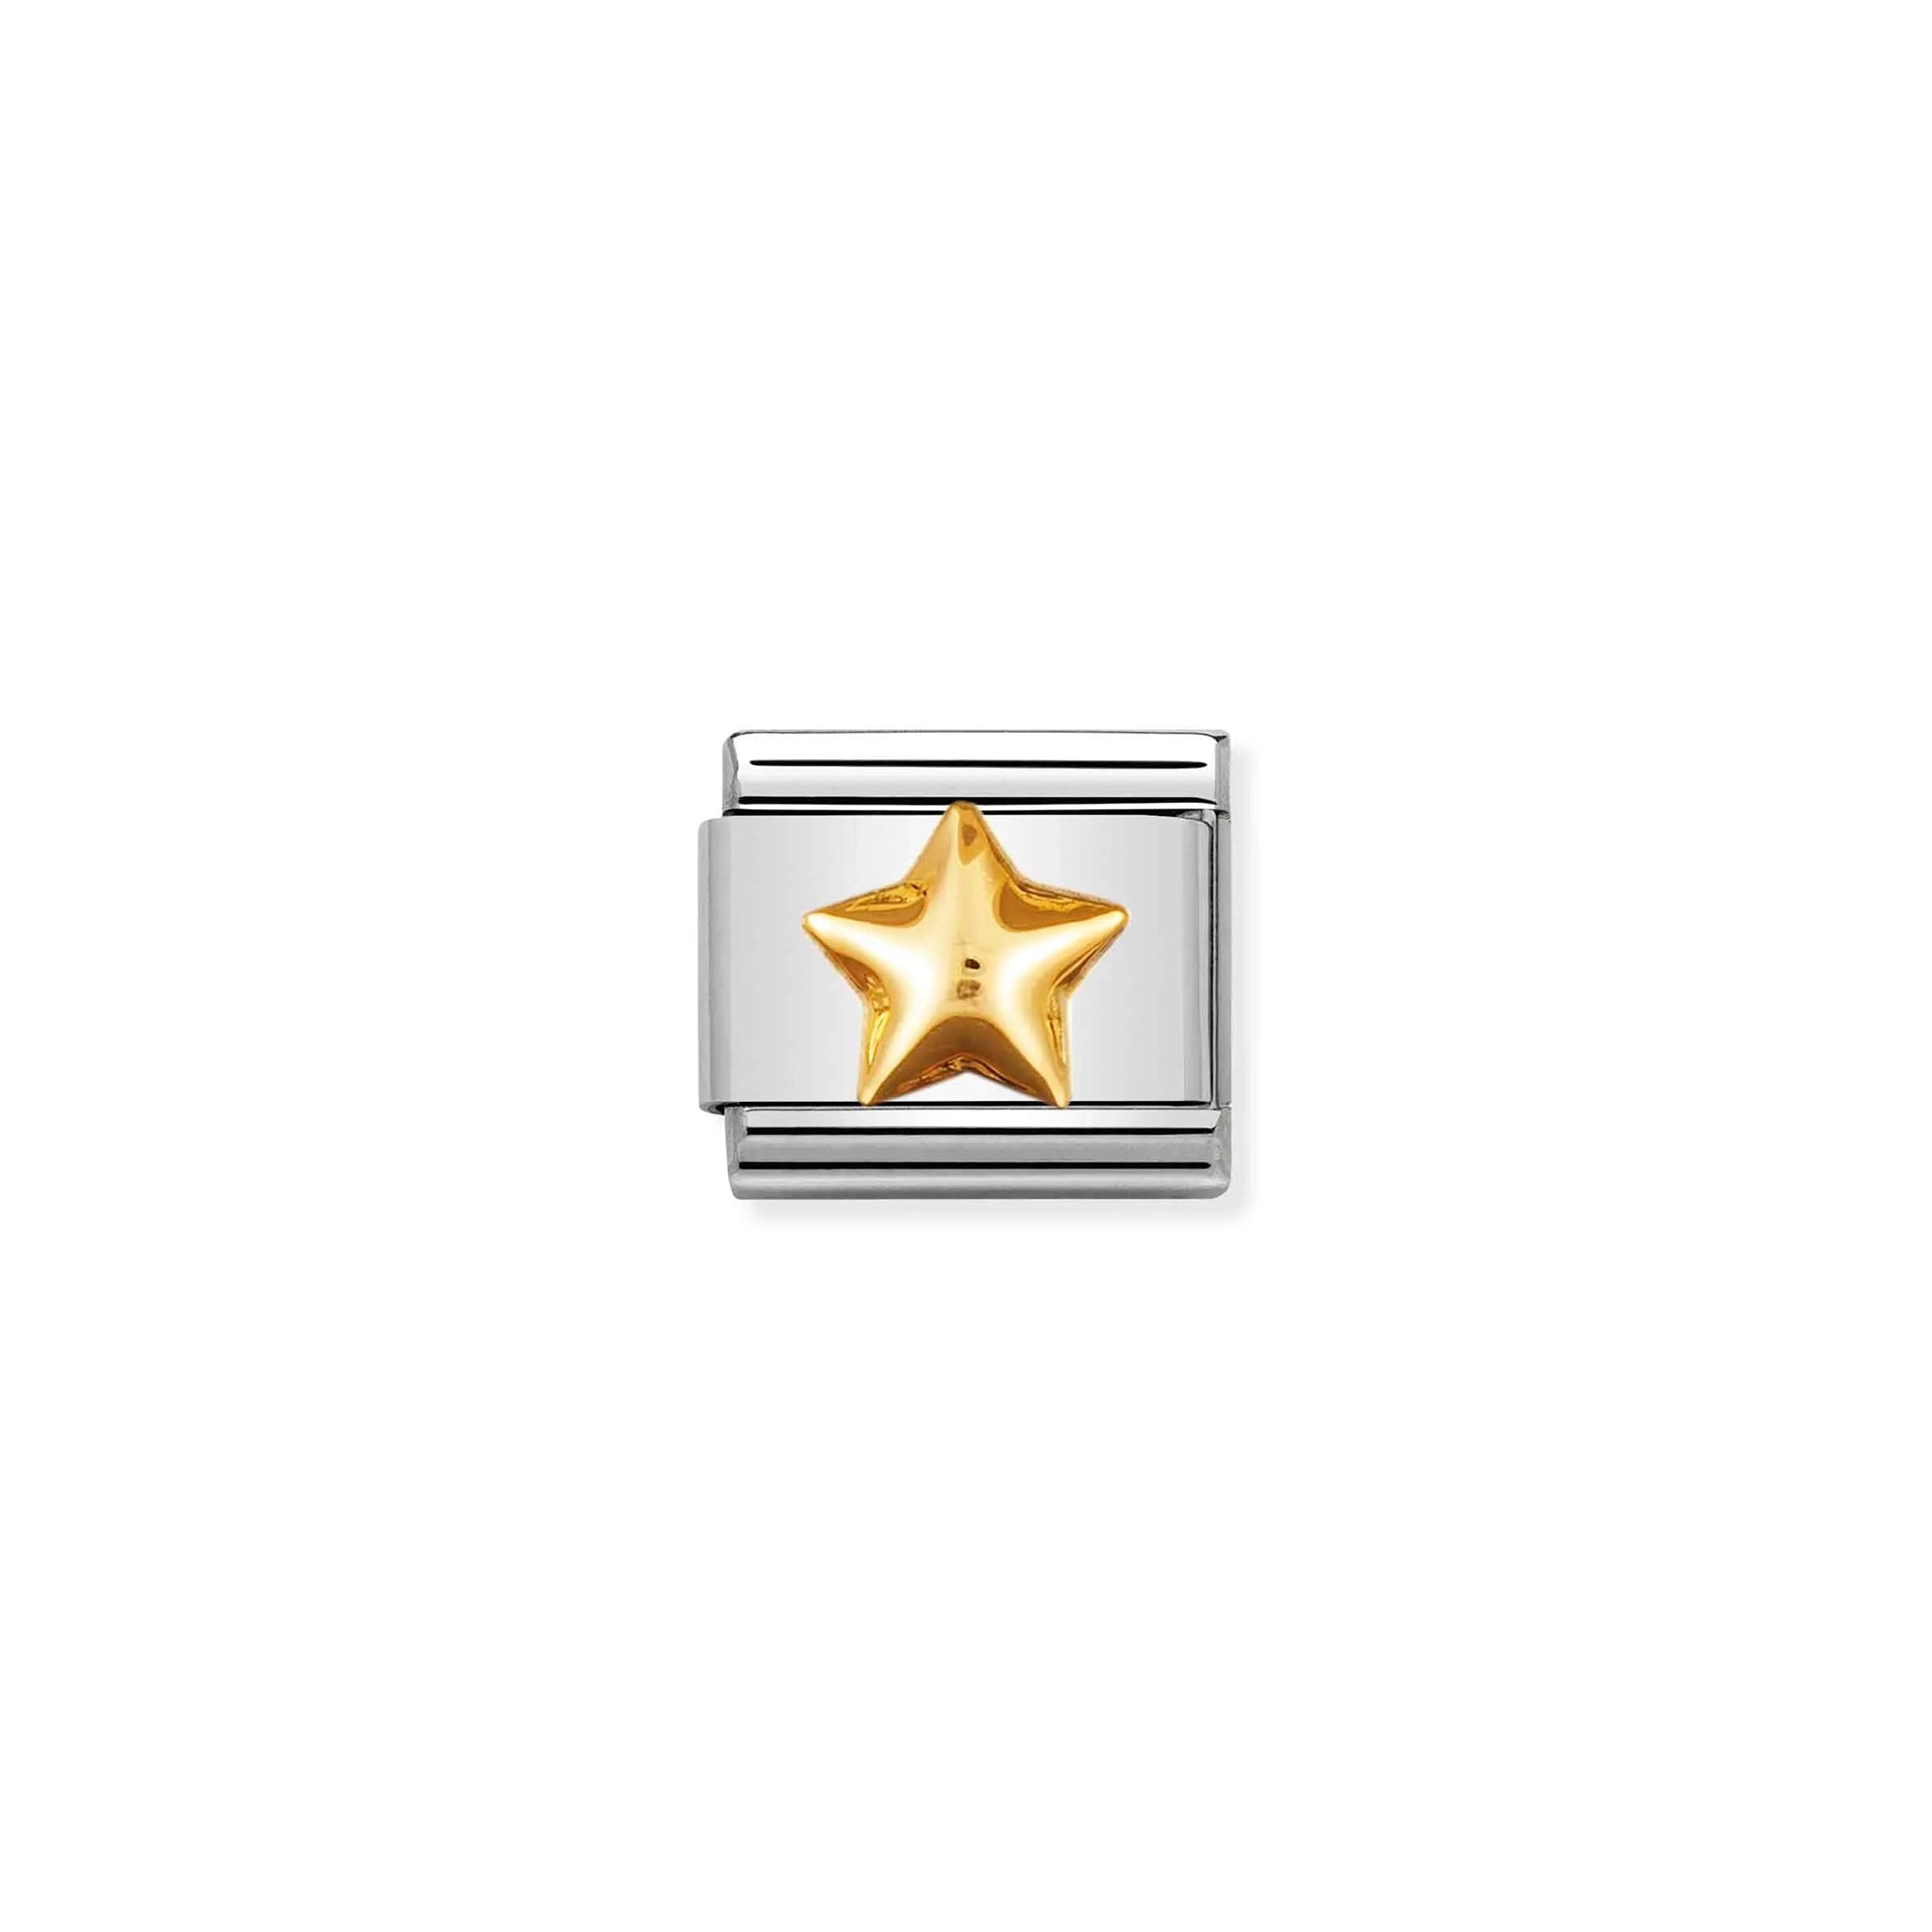 A Nomination Italy charm featuring a raised plain gold star